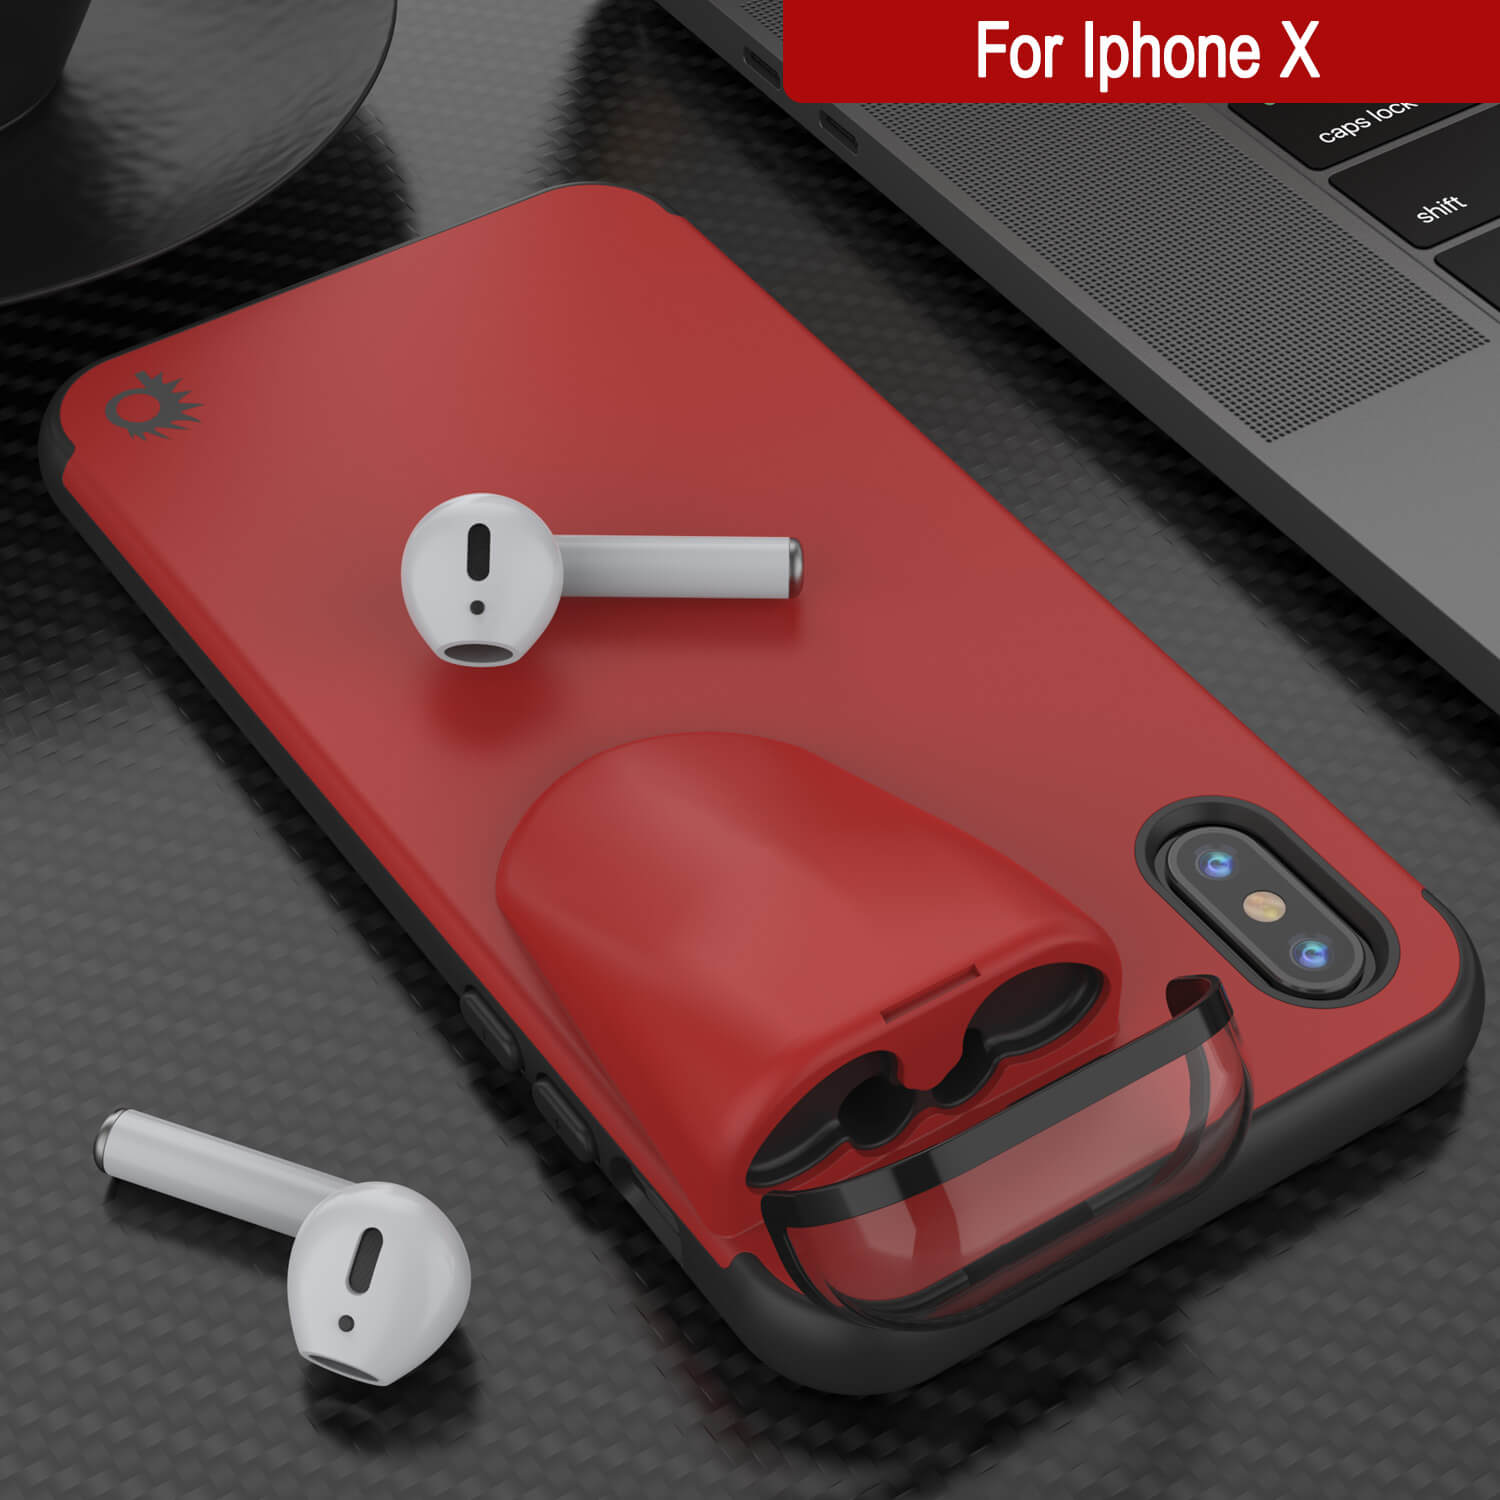 Apple iPhone X Silicone Case - Red for sale online